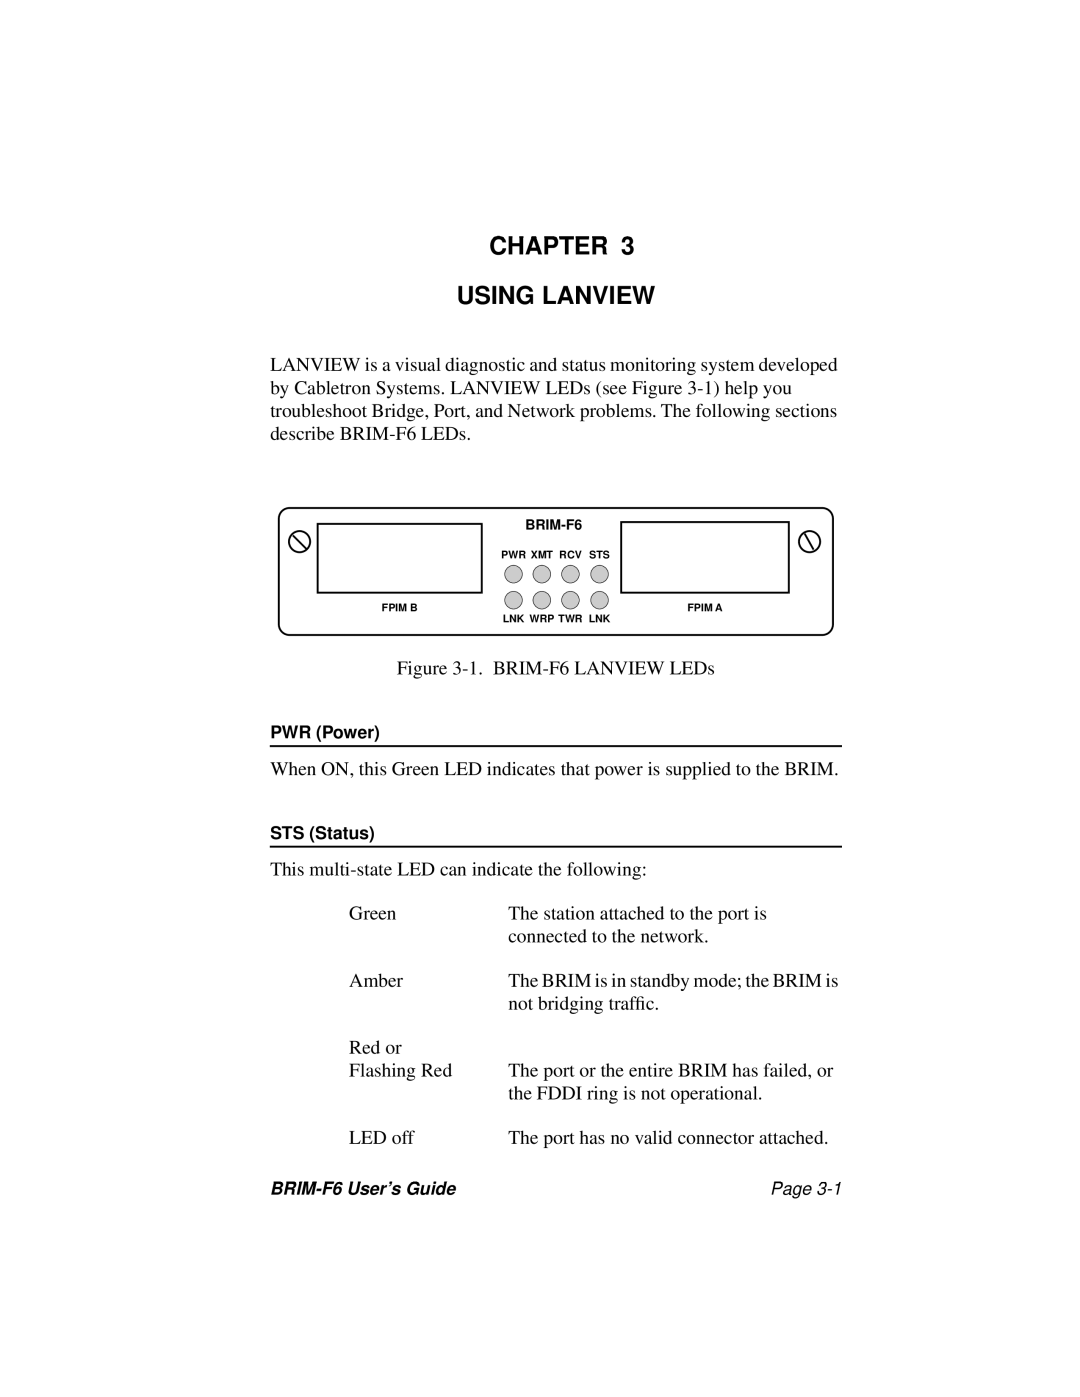 Cabletron Systems BRIM-F6 manual Chapter Using Lanview 